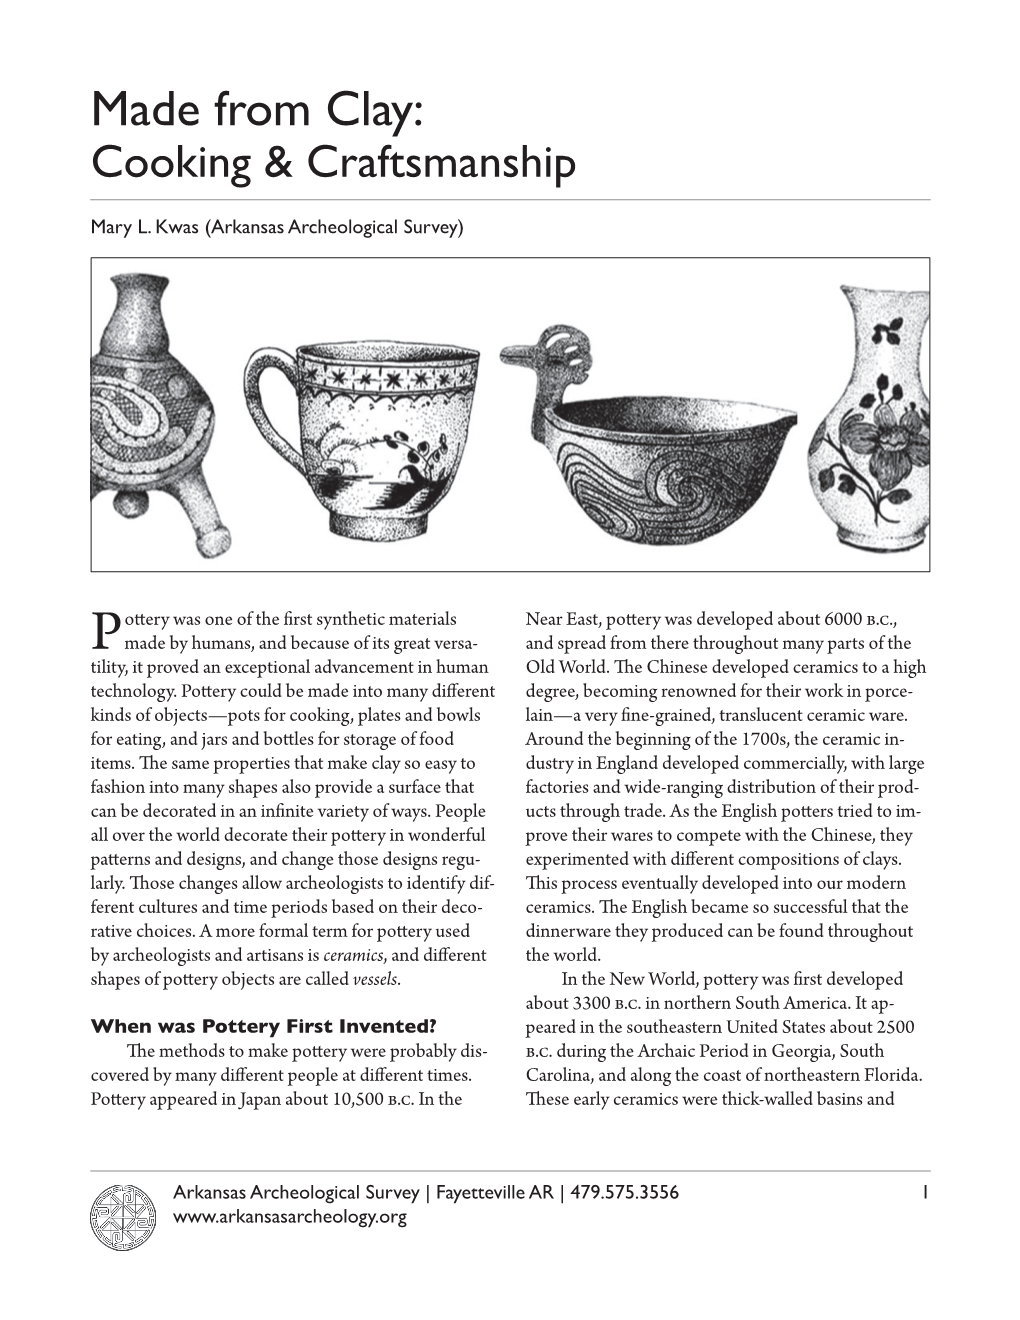 Made from Clay: Cooking & Craftsmanship